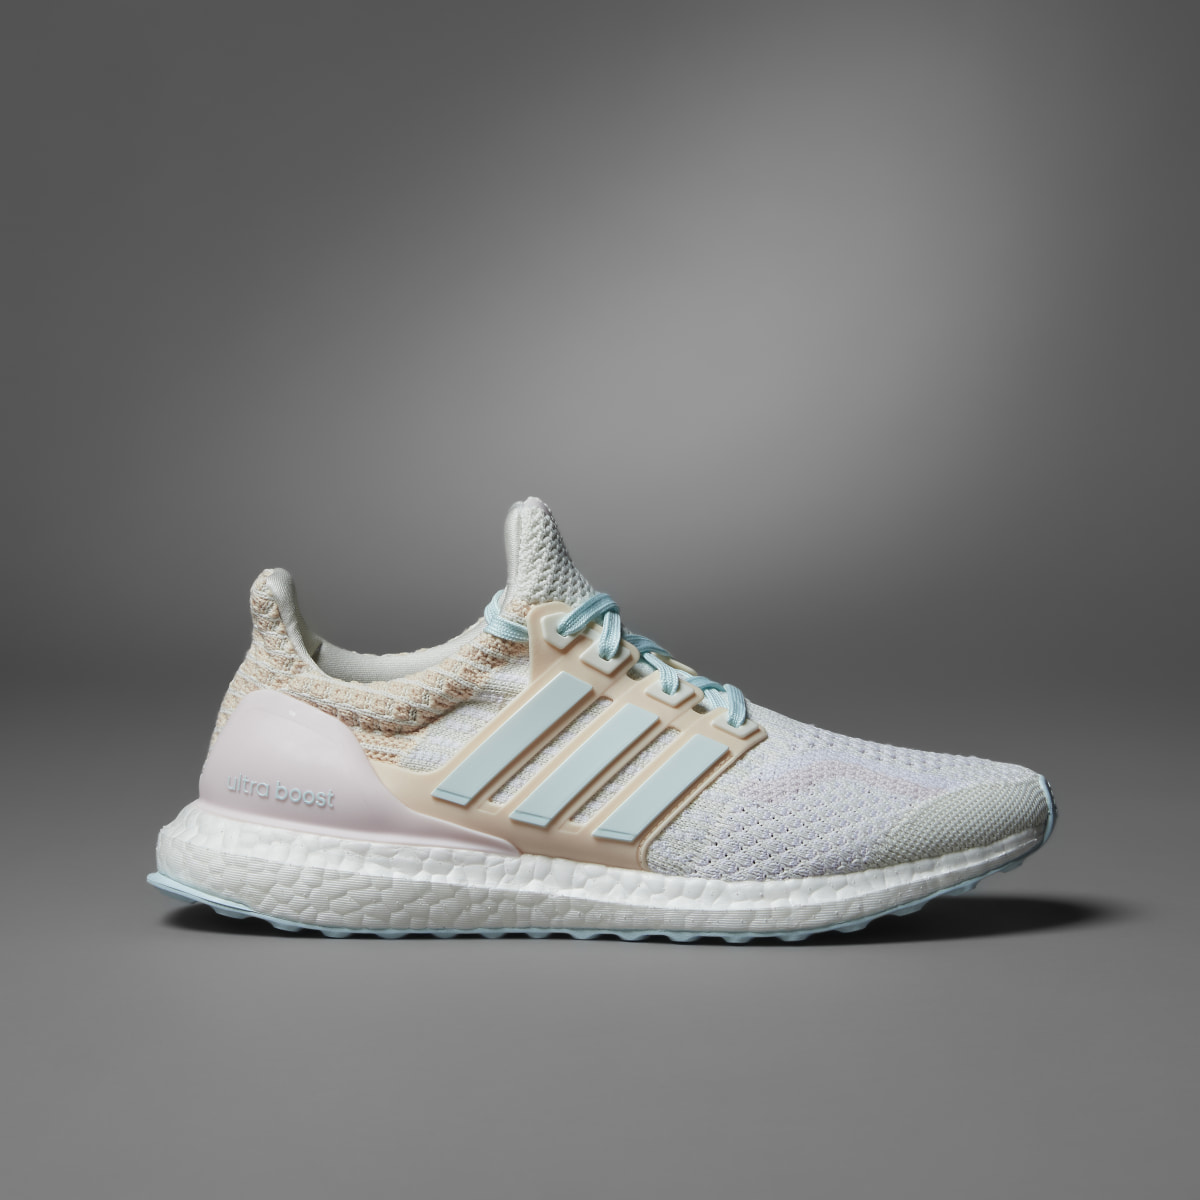 Adidas Ultraboost 5.0 DNA Shoes. 4